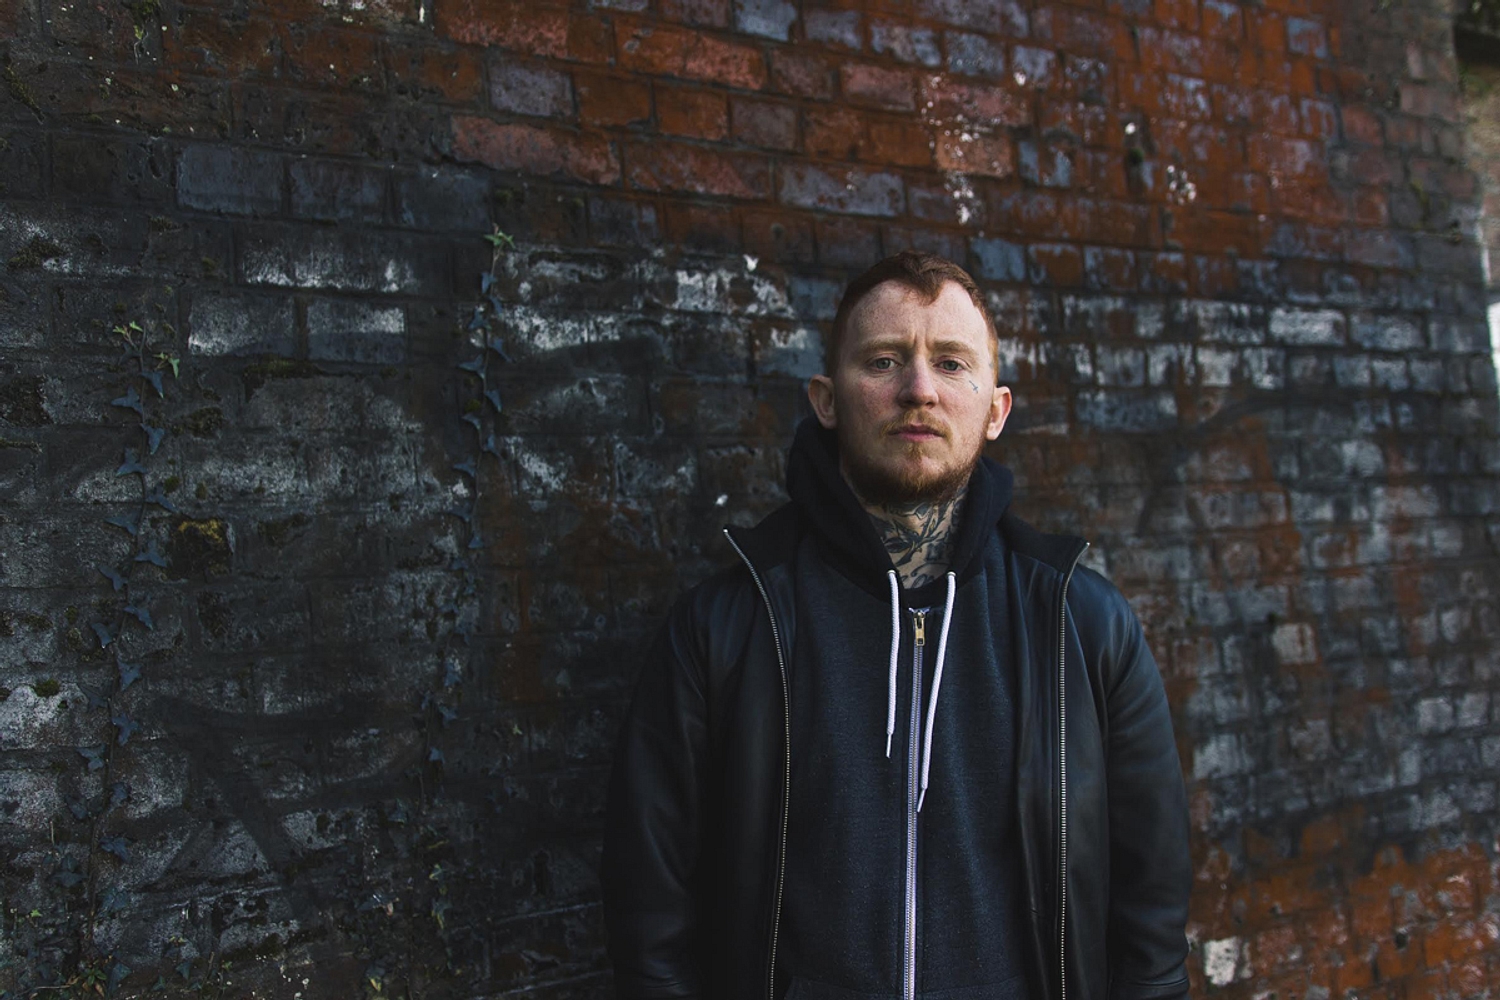 Frank Carter & The Rattlesnakes reveal new video for ‘Trouble’